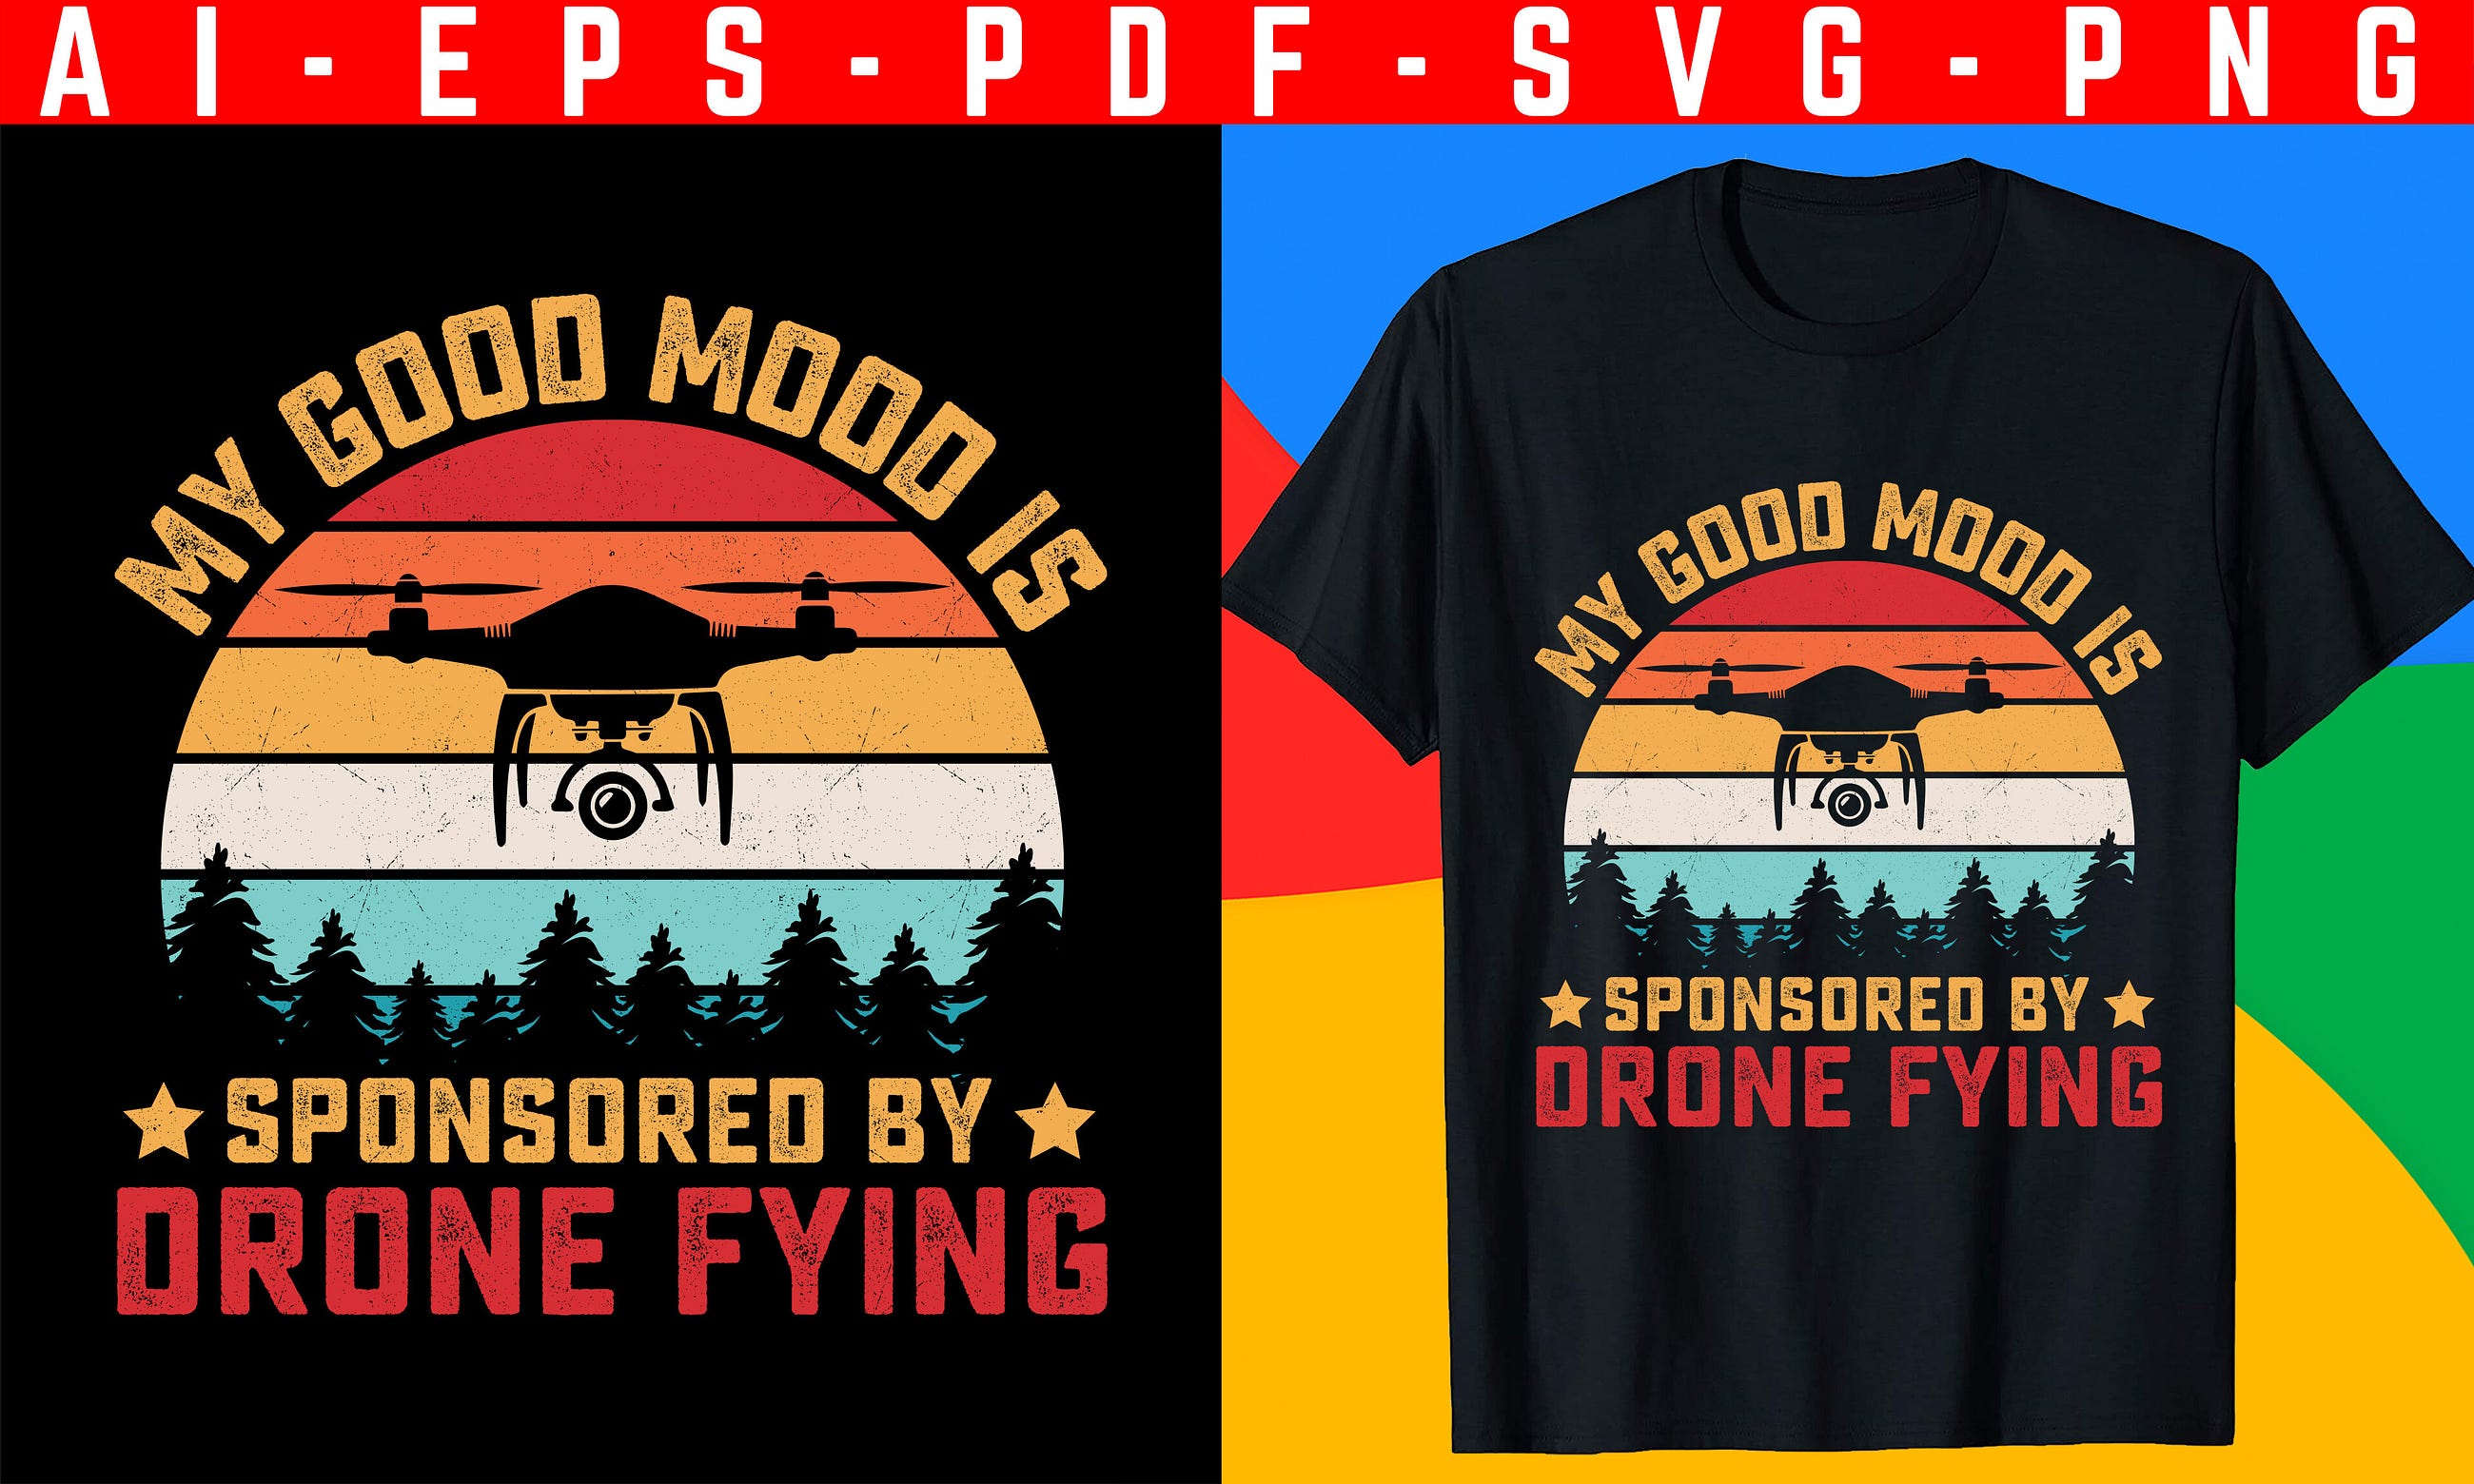 Good Mood is Sponsored by Drone Flying